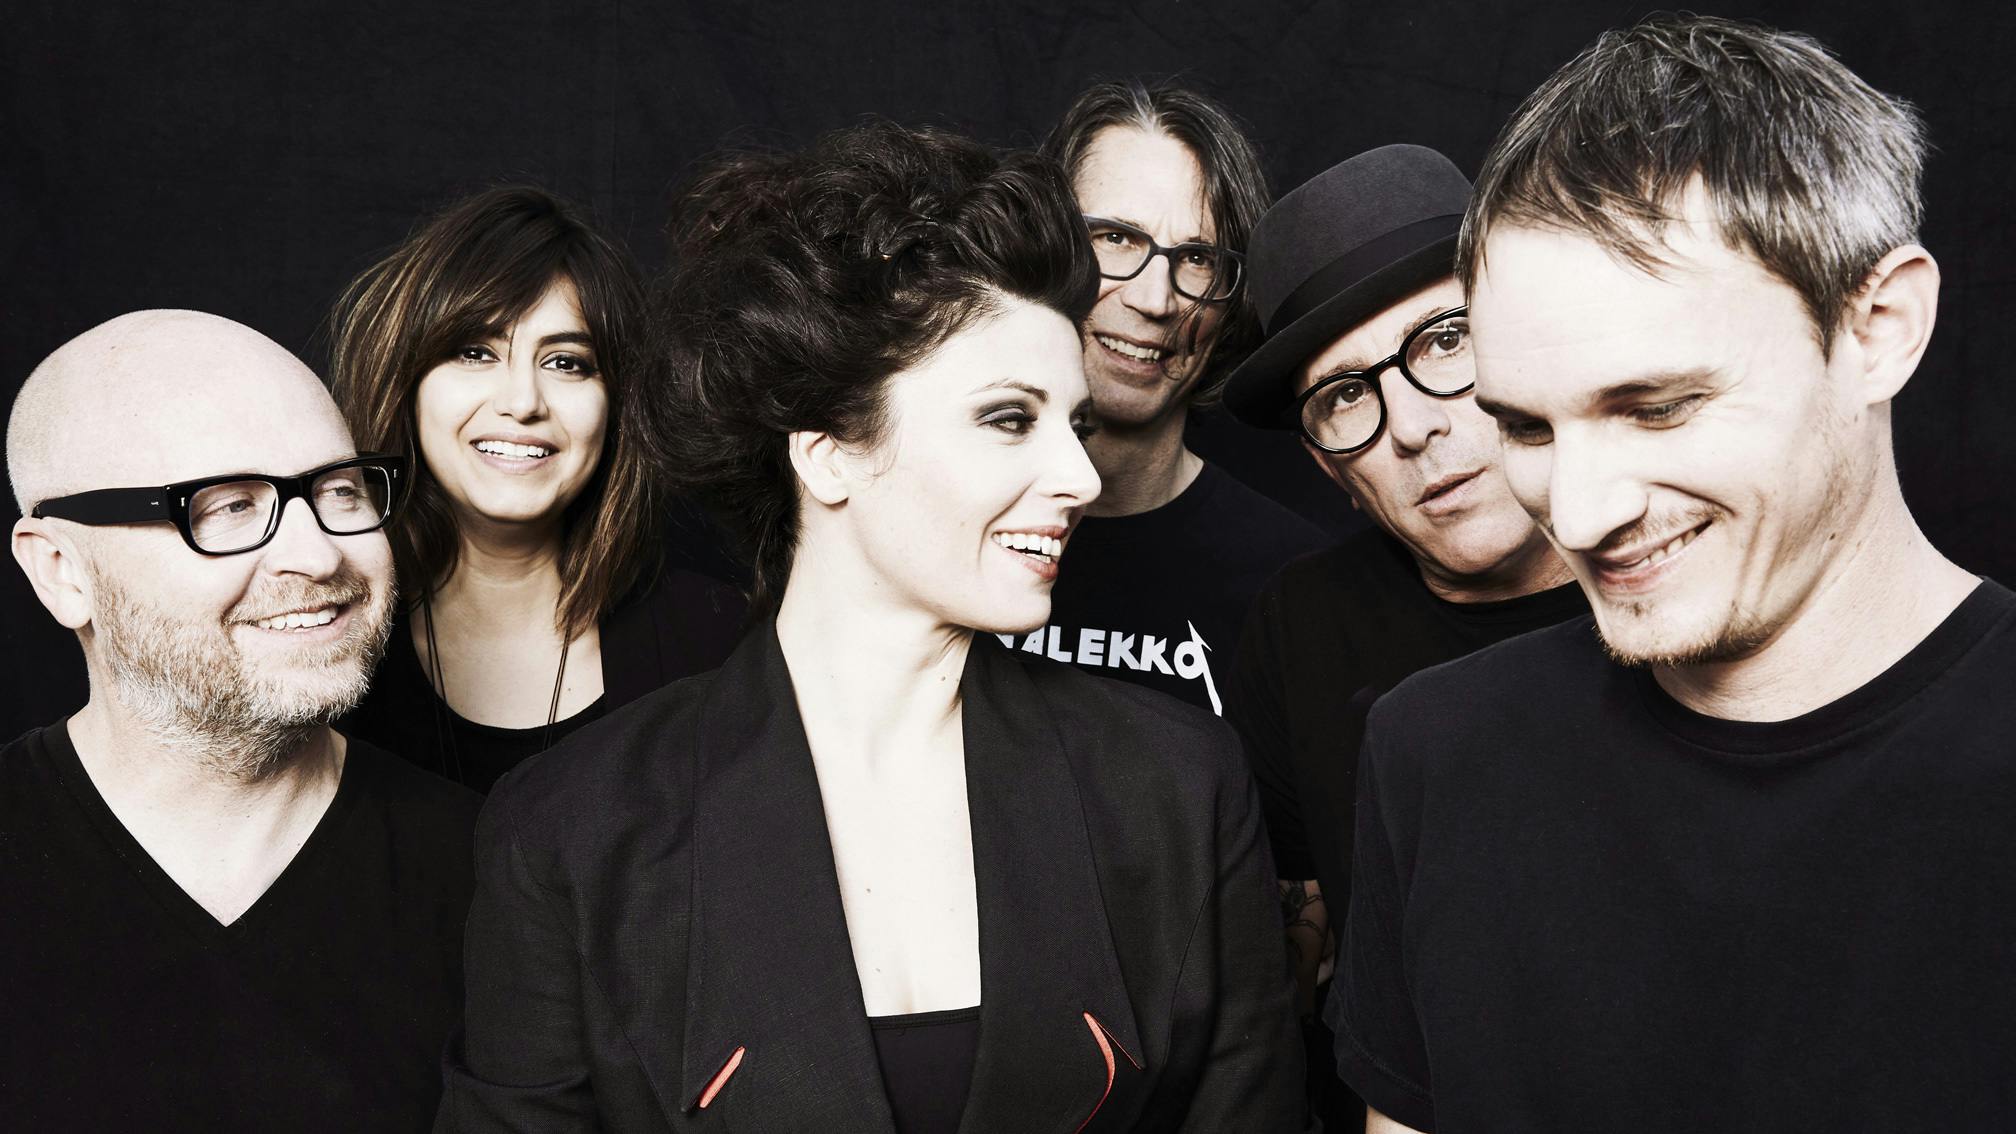 It Looks Like Puscifer Are Teasing A New Album